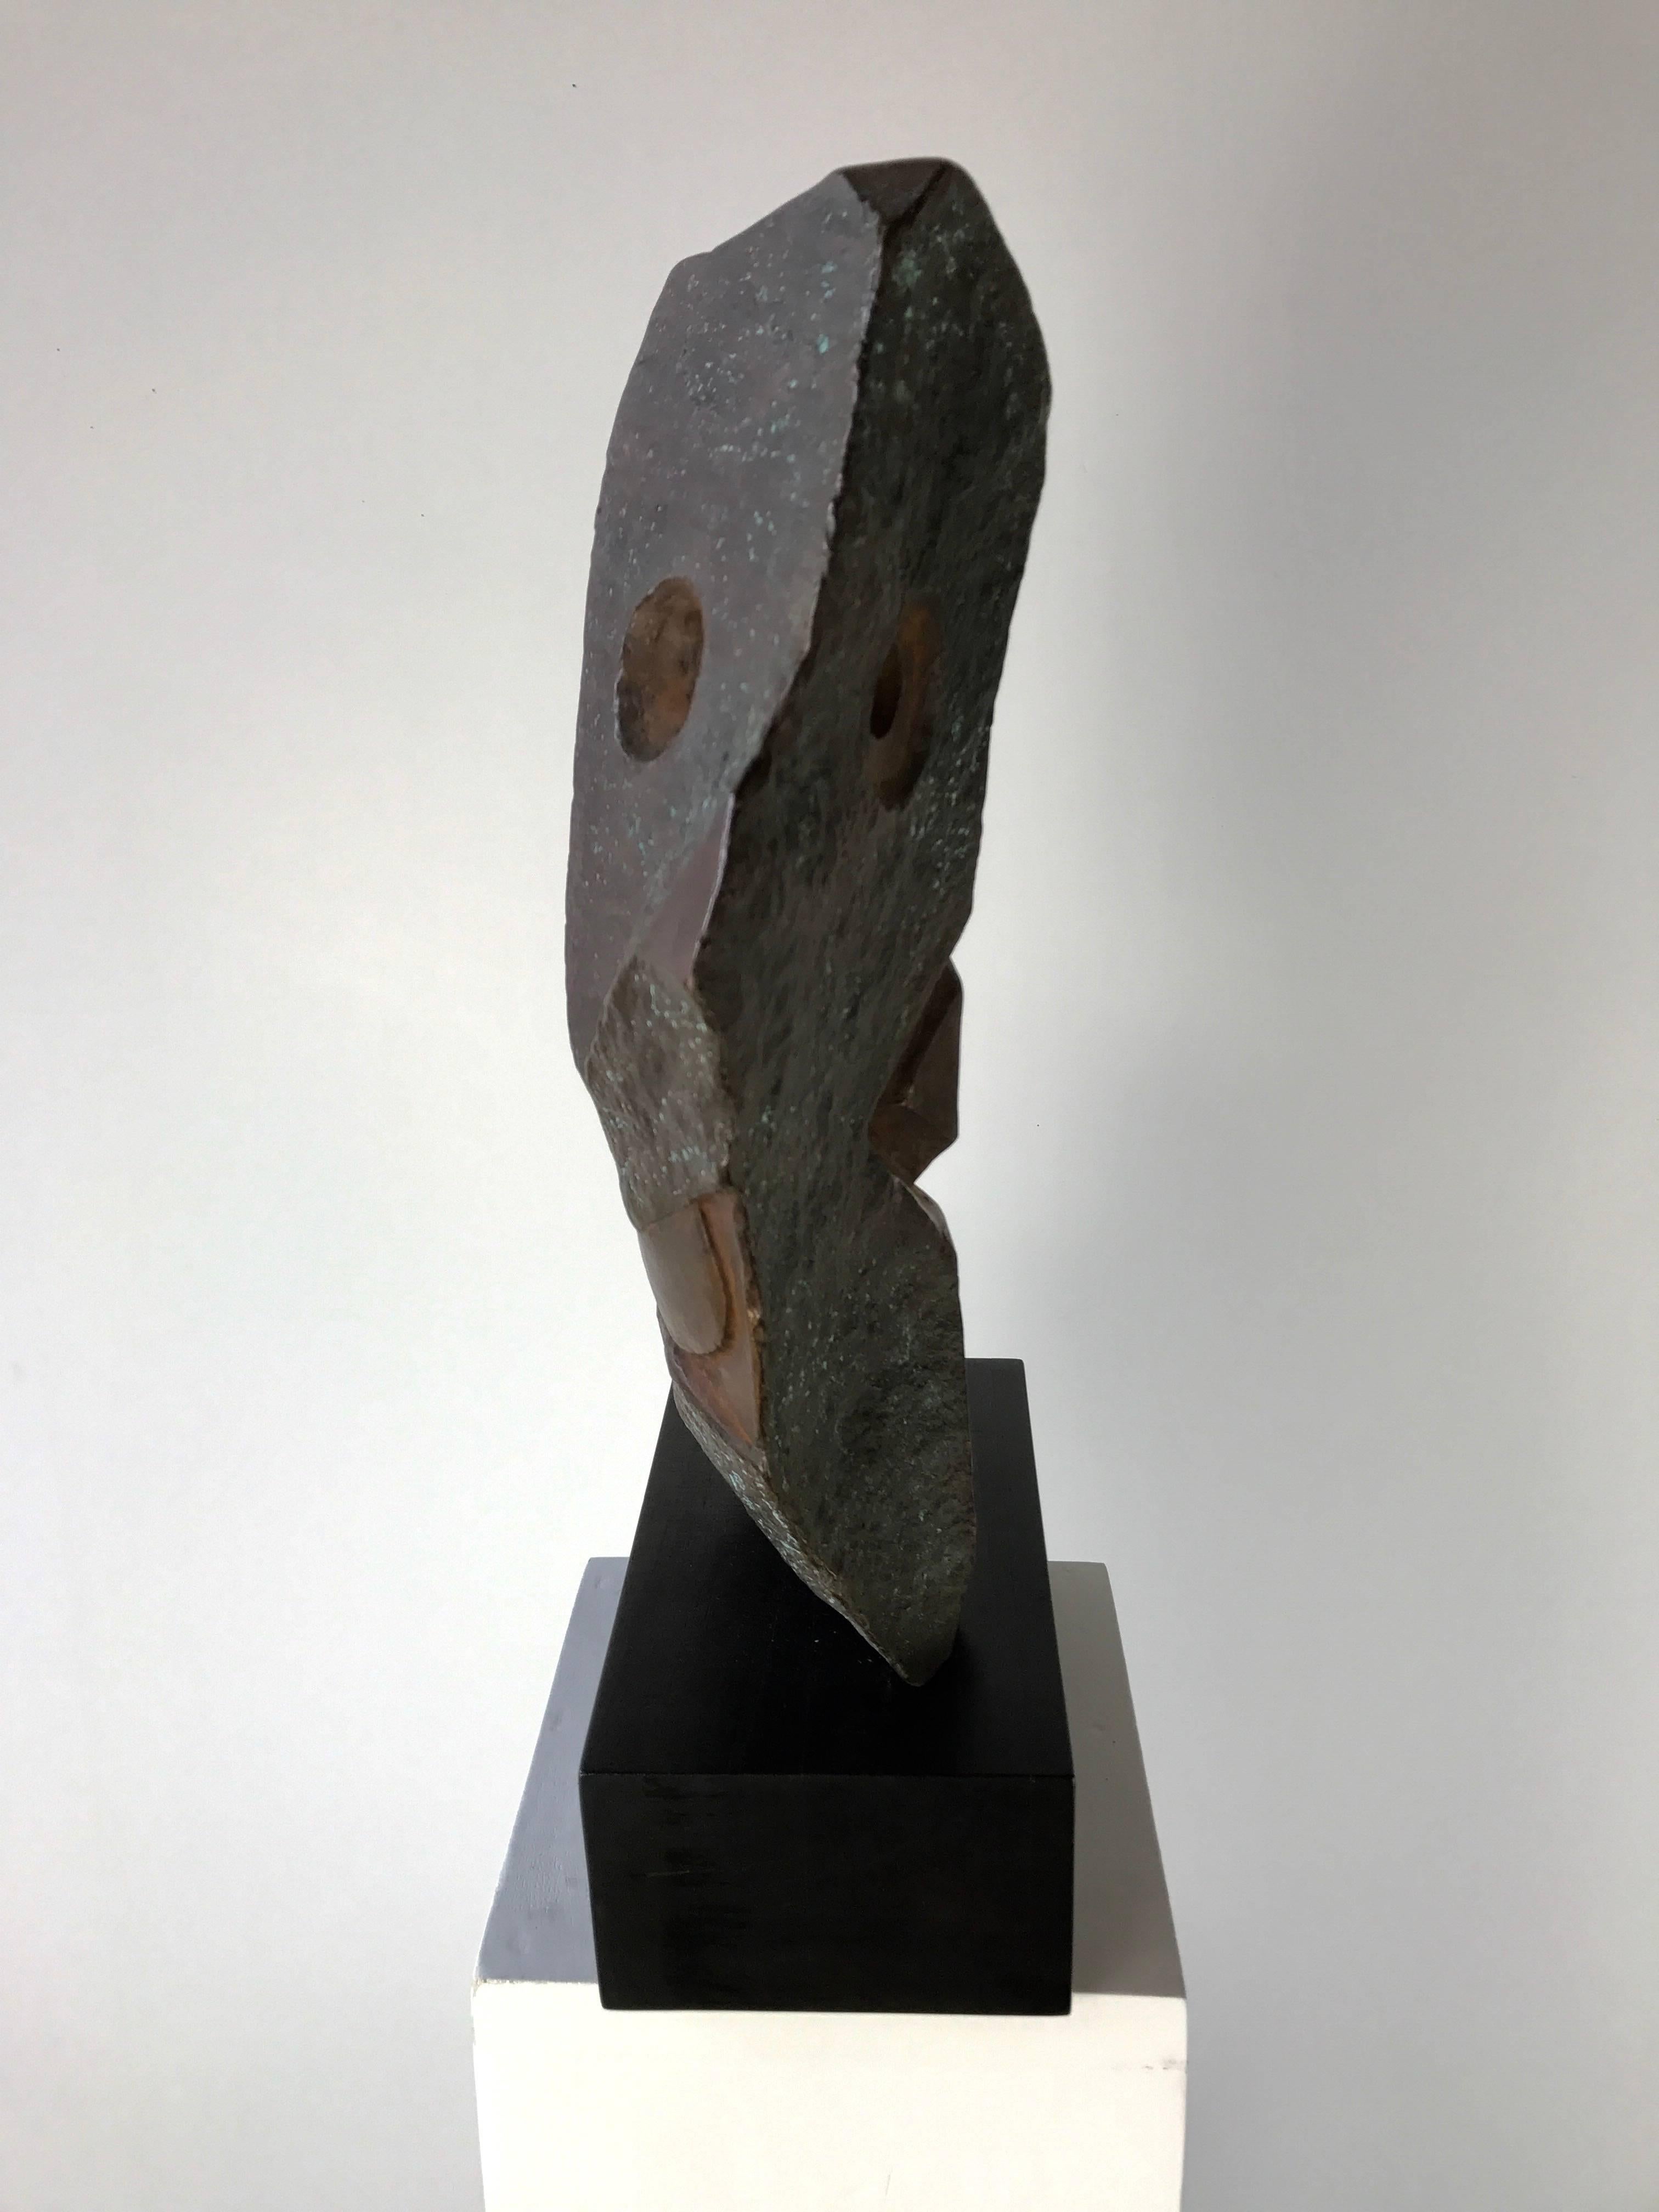 Modernist bronze Angular head sculpture by Christian Roesch New York City Studios.,Piccaso -like design, featuring four cubist faces depending on how sculpture is viewed, Wonderful patina, finish, Recently acquired from Annette Cravens Estate,